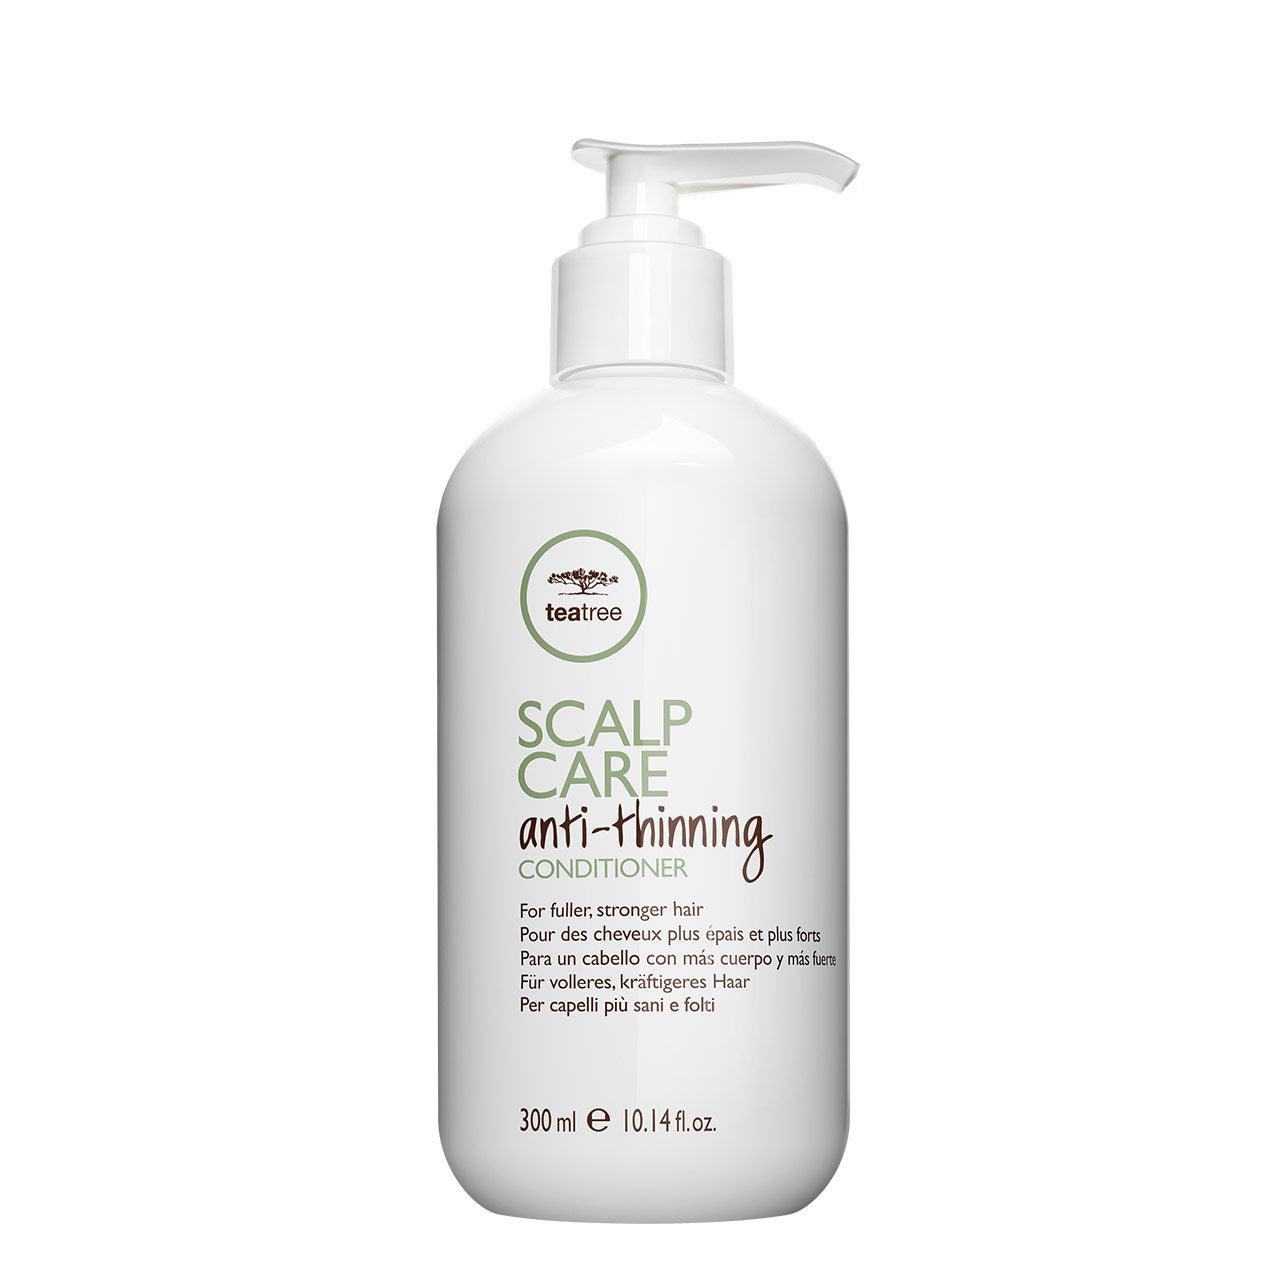 Tea Tree Scalp Care Anti-Thinning Conditioner - 300ML - by Paul Mitchell |ProCare Outlet|